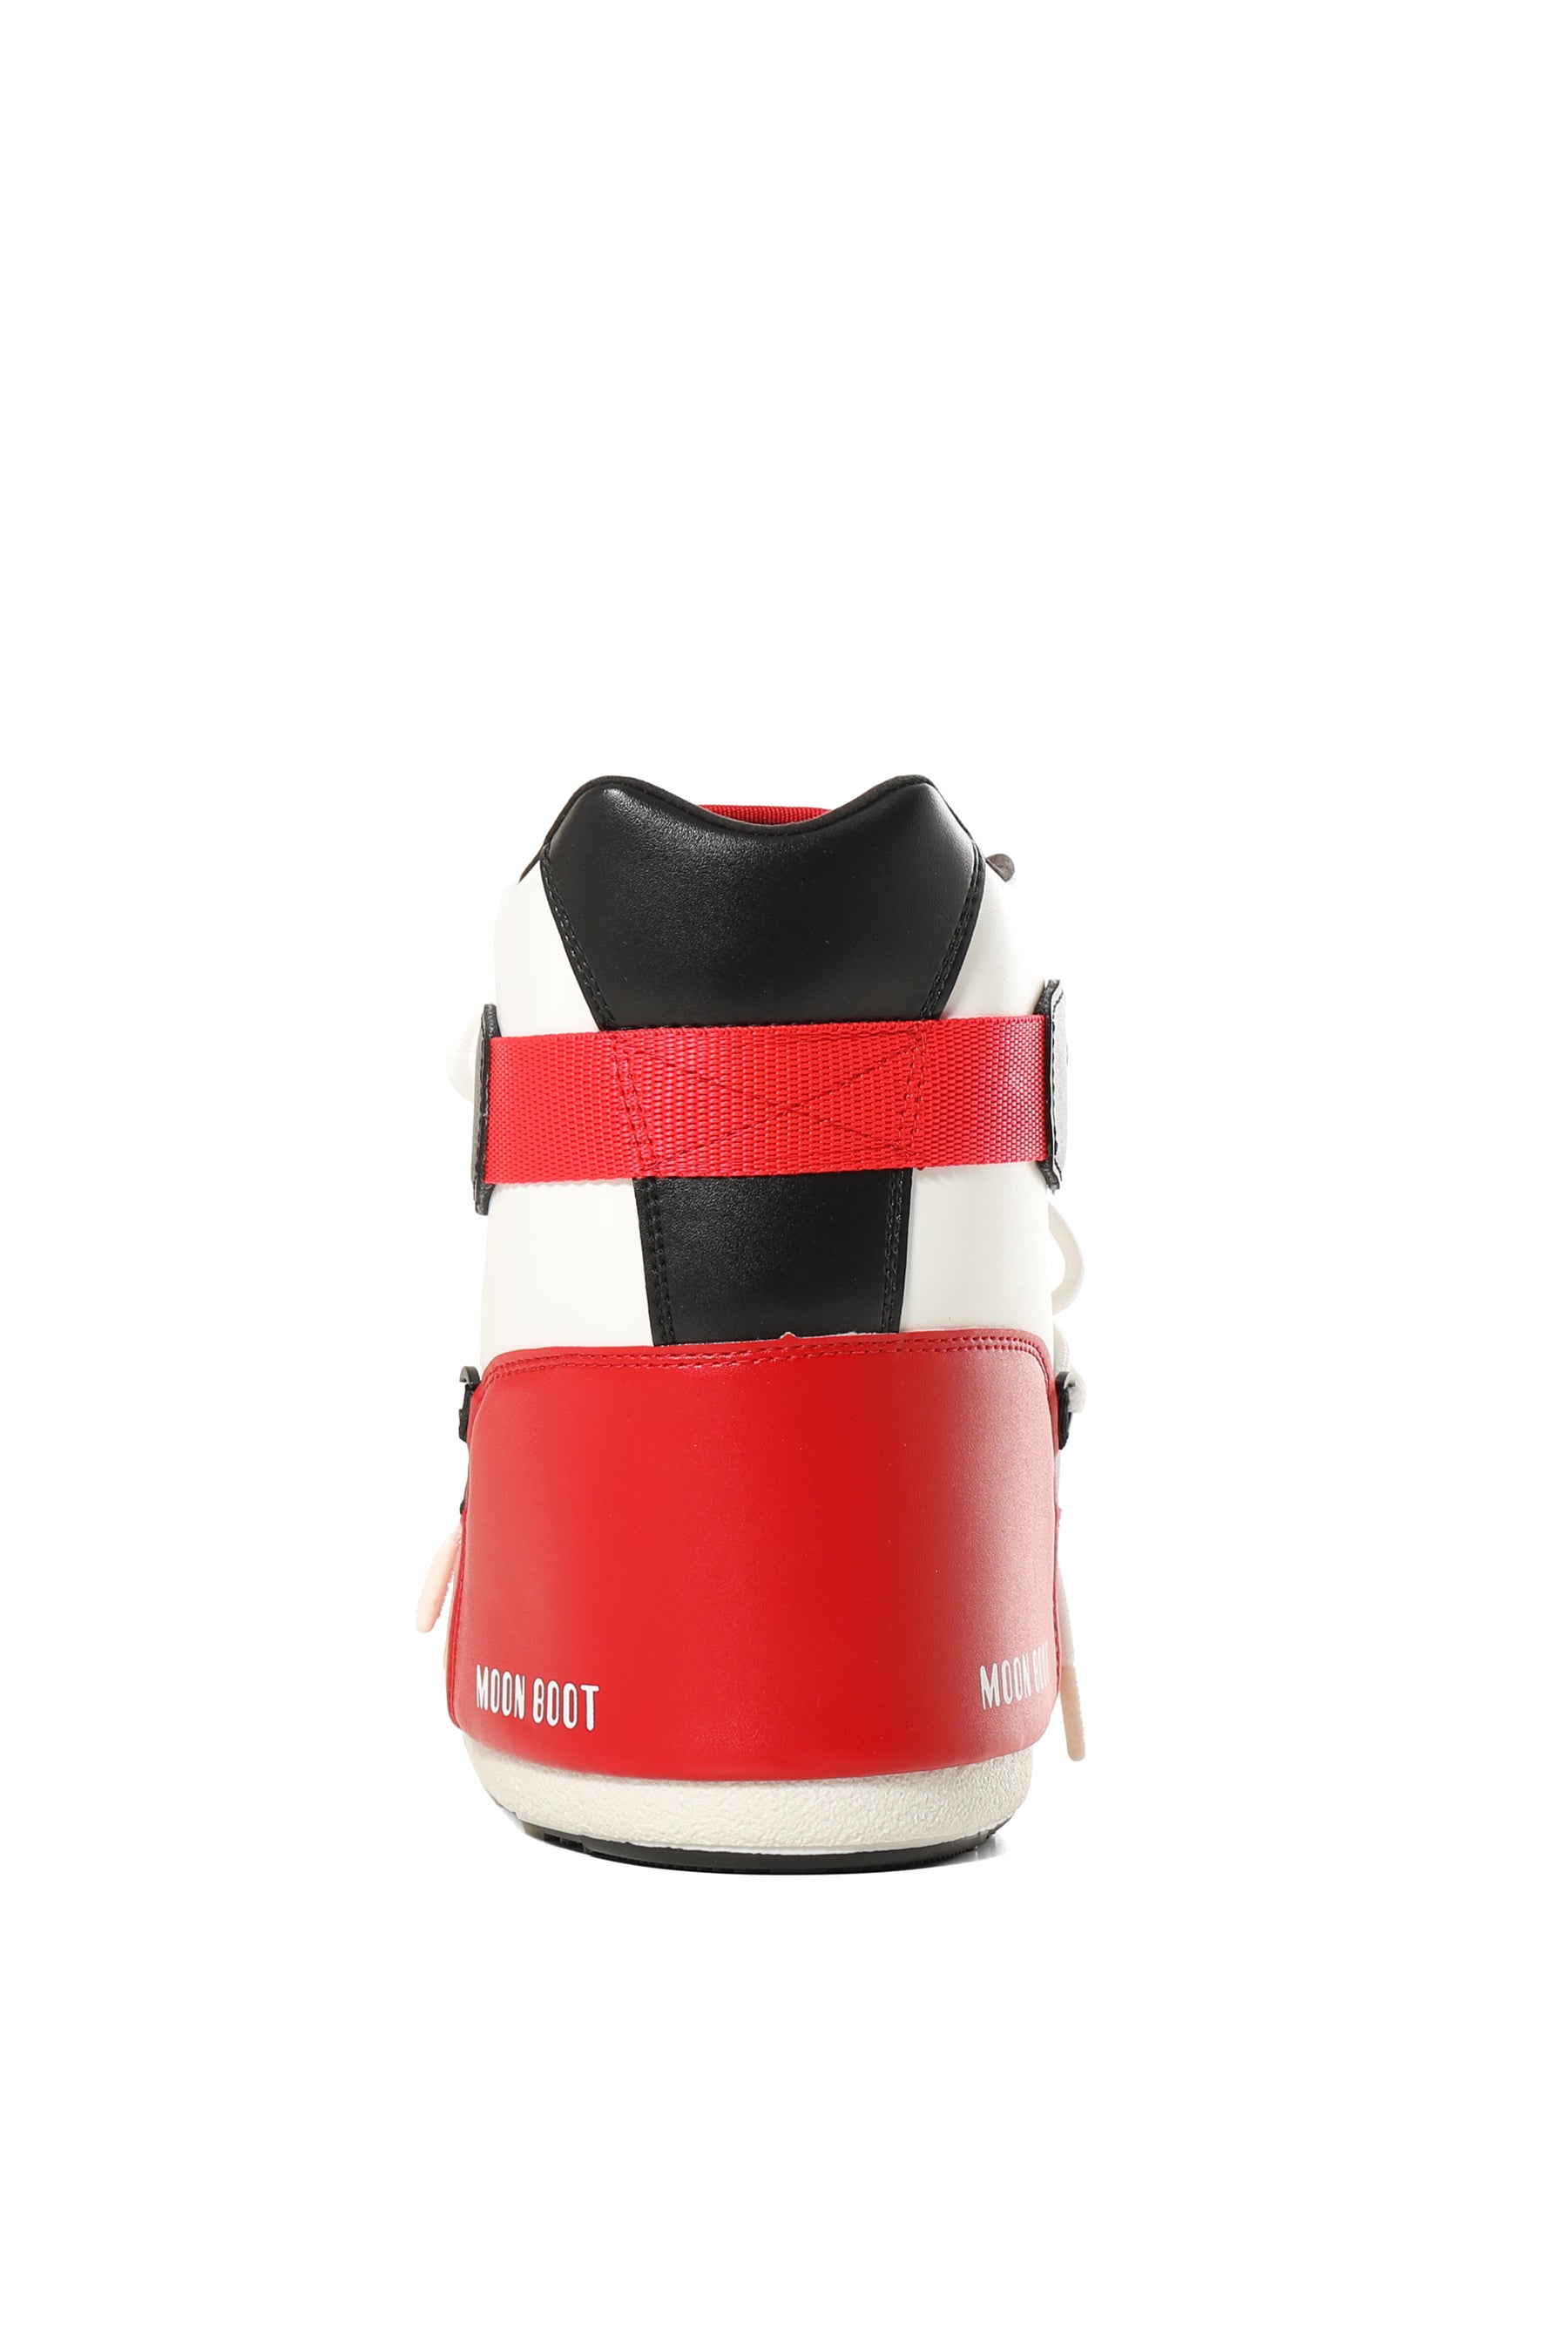 MB SNEAKER MID / WHT RED BLK